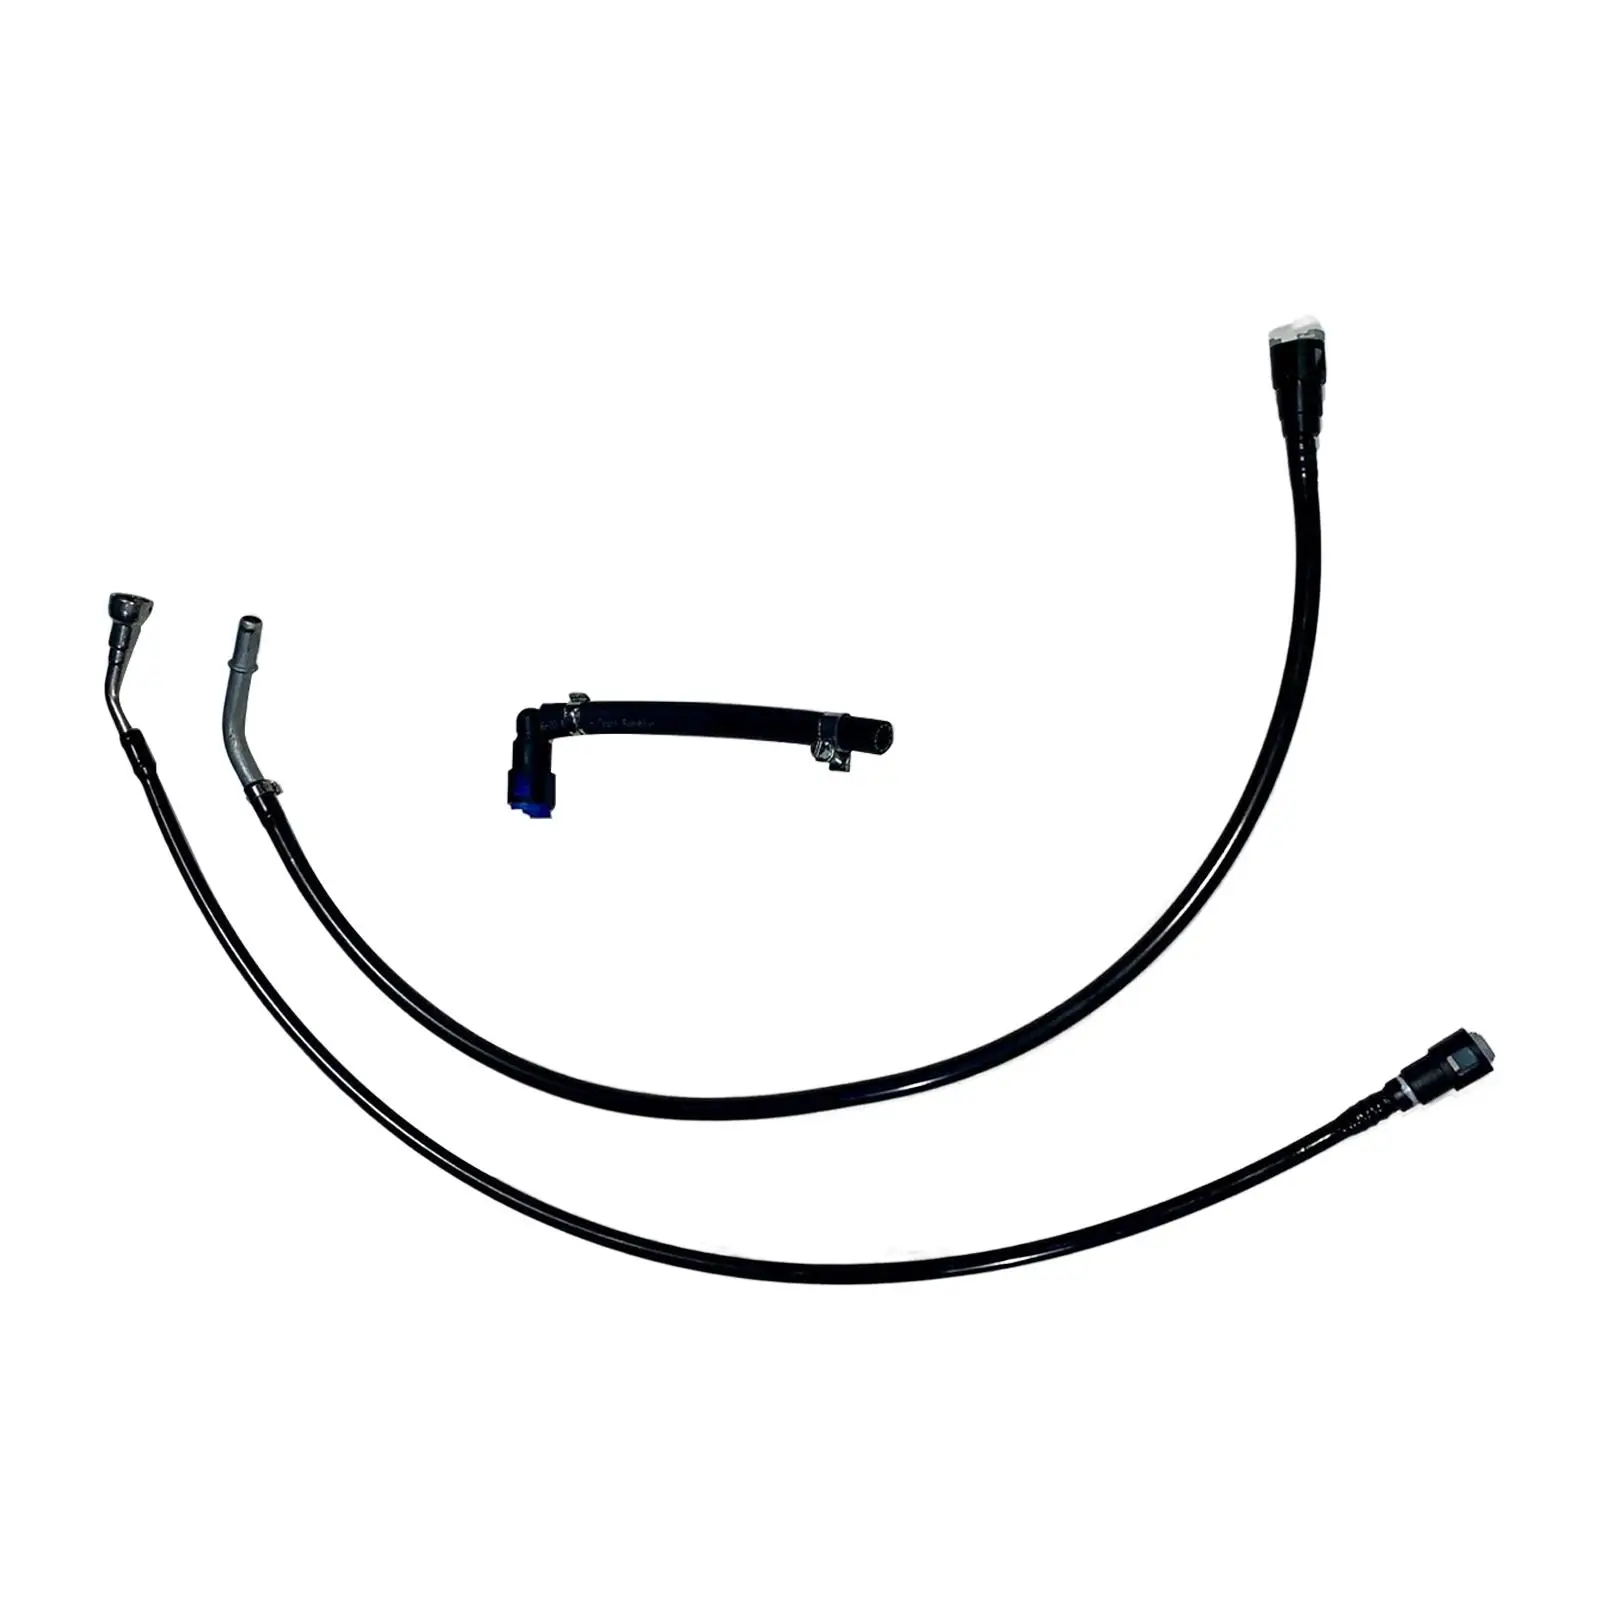 Fuel Line Set Easy Installation Durable Spare Parts fl Fg0918 Car Accessories Replacement Jeep 1999-2004 Grand Cherokee